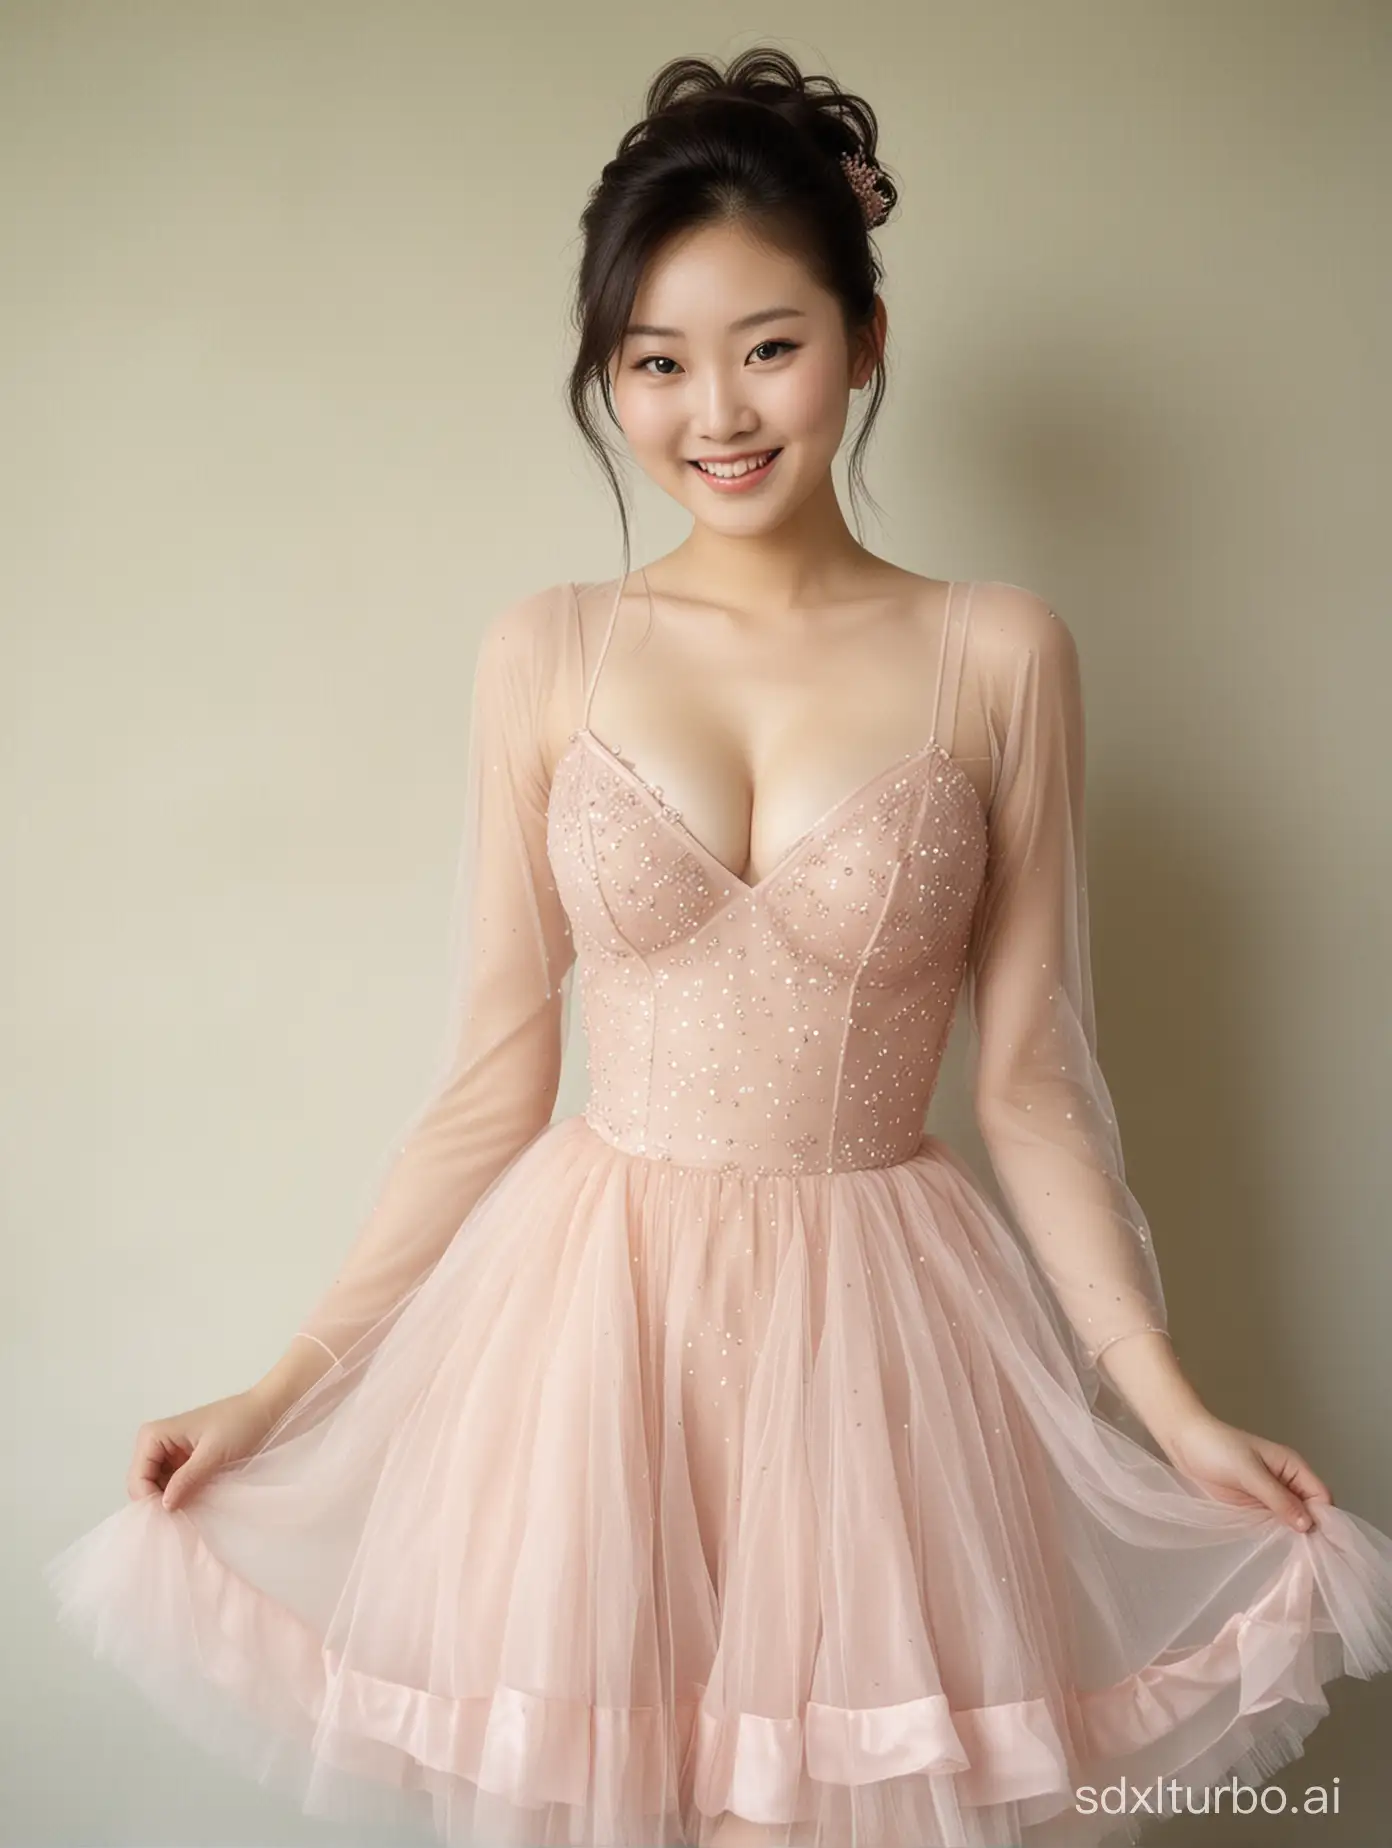 1 Chinese young woman, huge breast，sexy，full body, smile, sheer tulle dress，Photograph by Loretta Lux